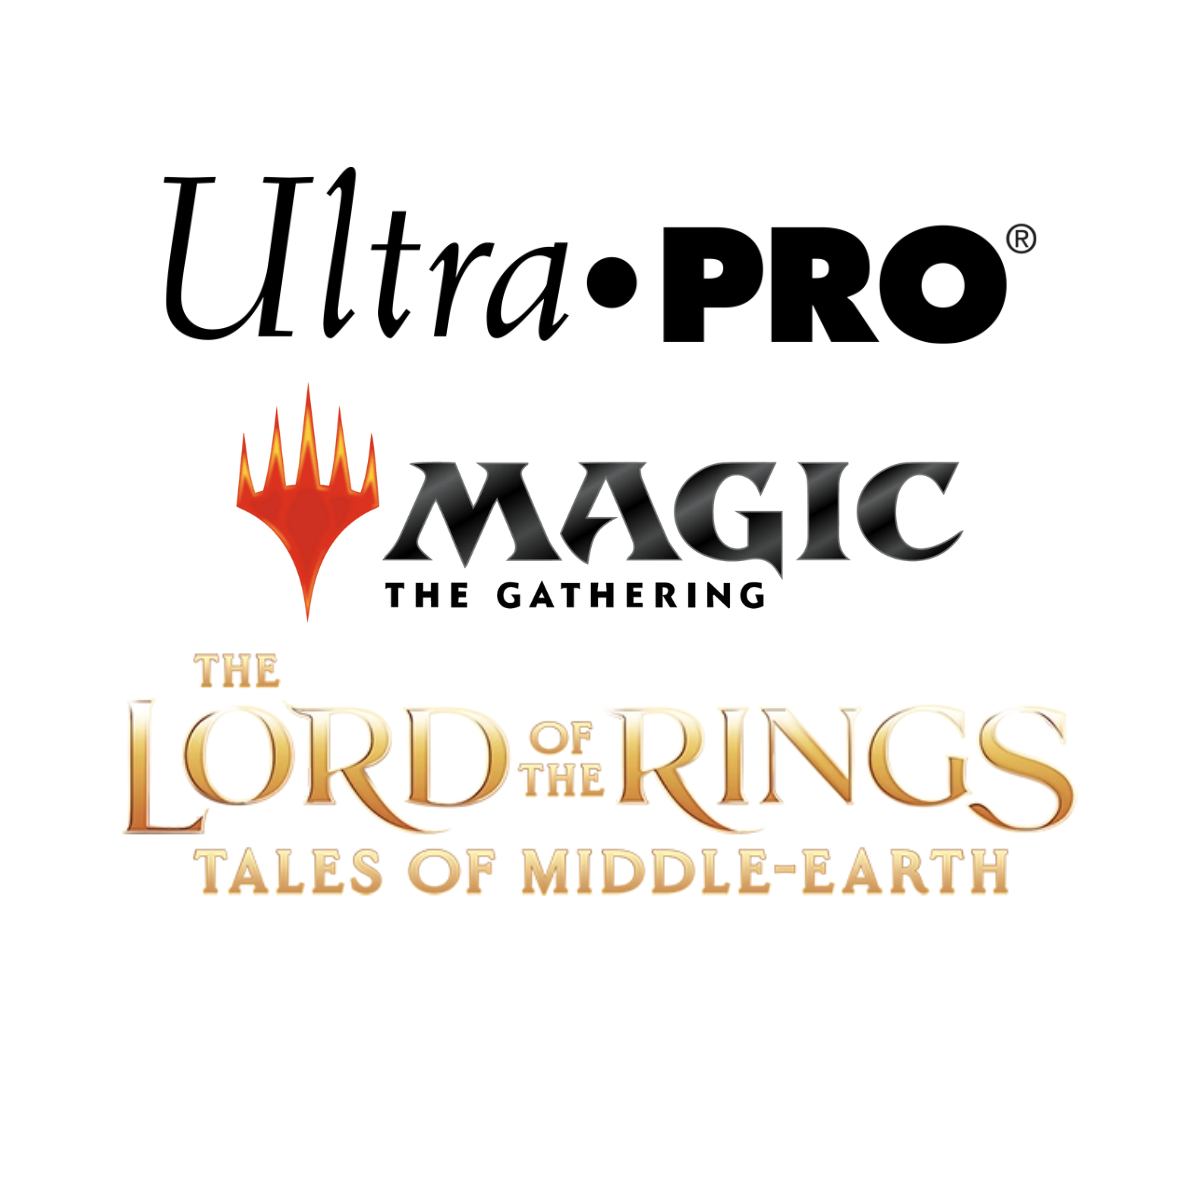 ULTRA PRO x Magic x Lord of the rings